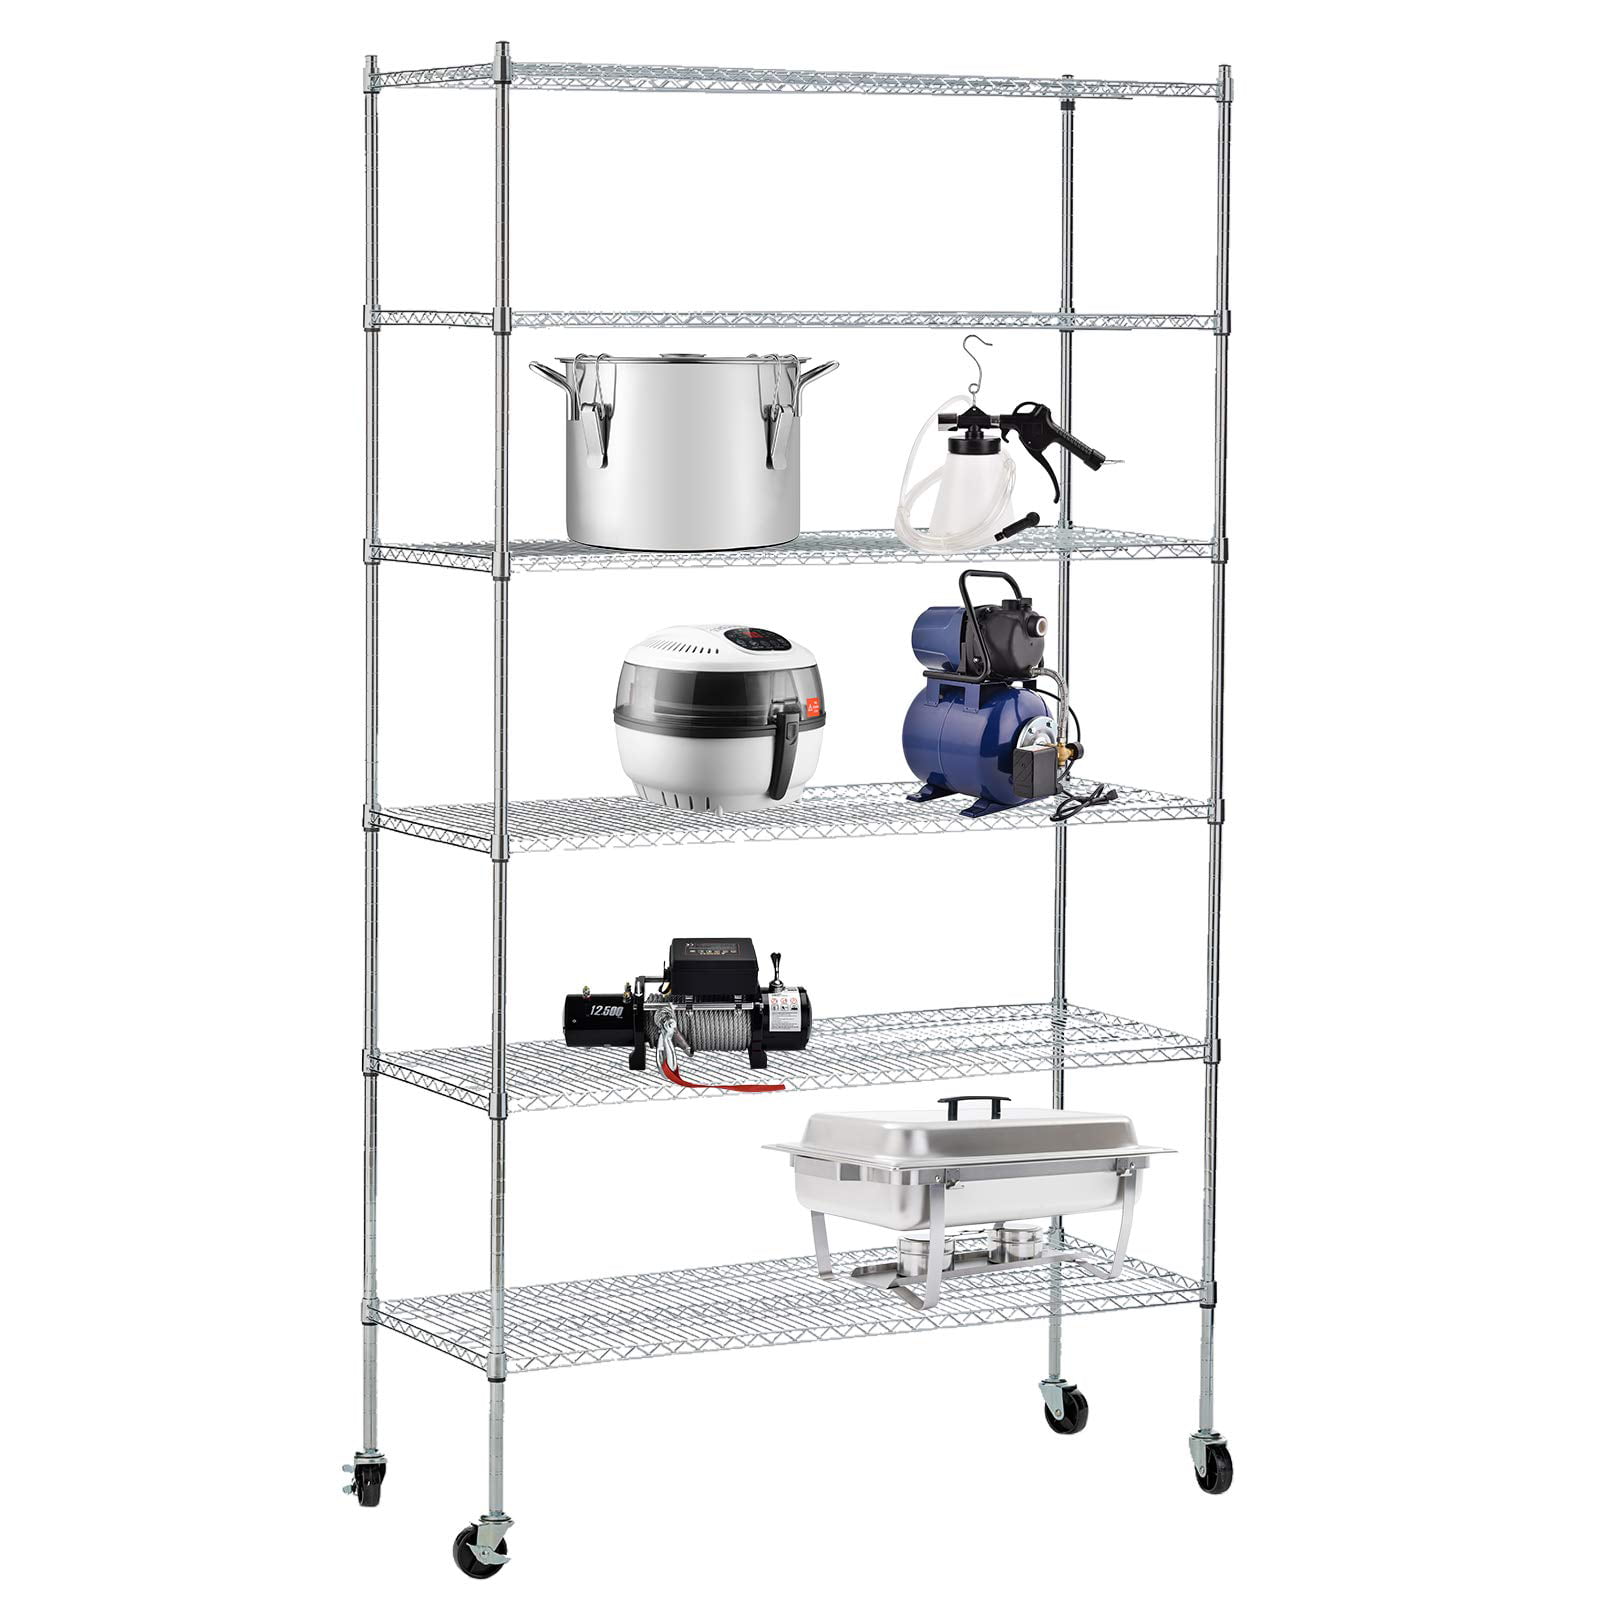 SUNCOO 6 Tier 82 H Strengthen Utility Shelves Metal Organizer Wire Rack Shelfing Storge Unit with Stiffeners Wire Shelves with Wheels Home Kitchen Office Garage 